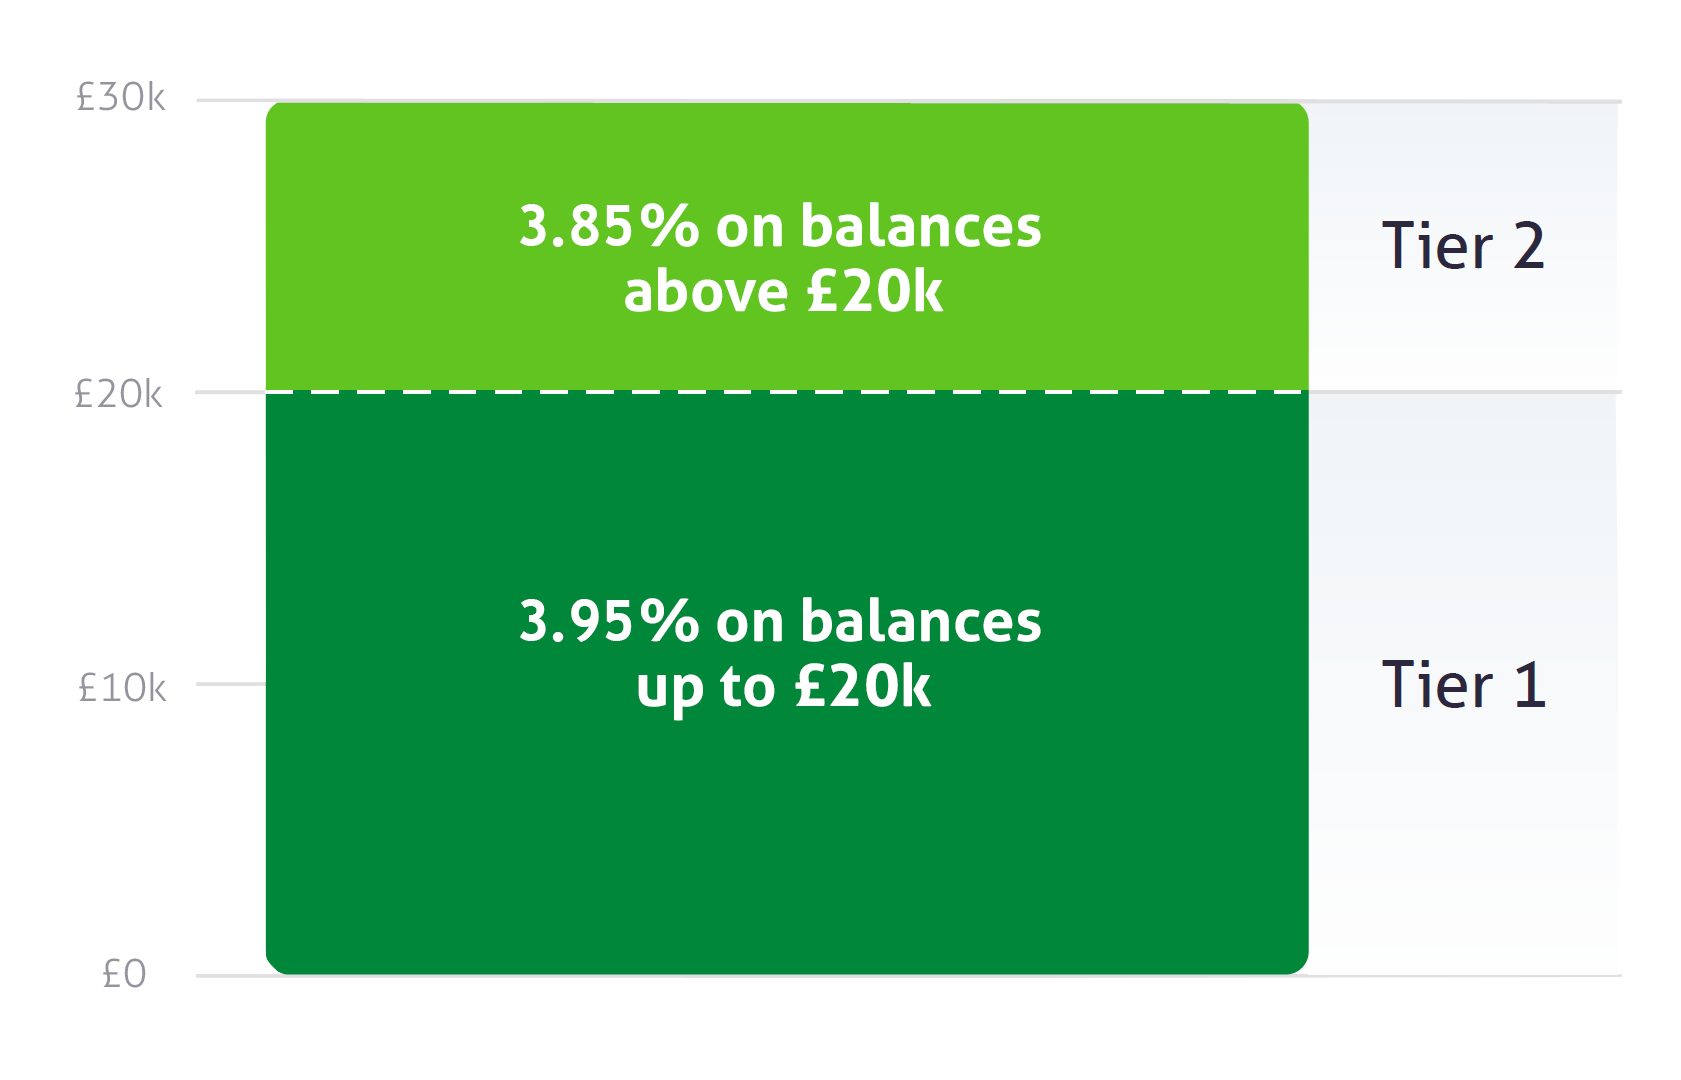 Image of graph with scale on the left hand side with £30k at the top down through £20k and £10k to £0. There is light green shading at the top with a label that says tier 2 and 3.85% on balances over £20k and dark green shading at the bottom with a label that says tier 1 and 3.95% on balances up to £20k.